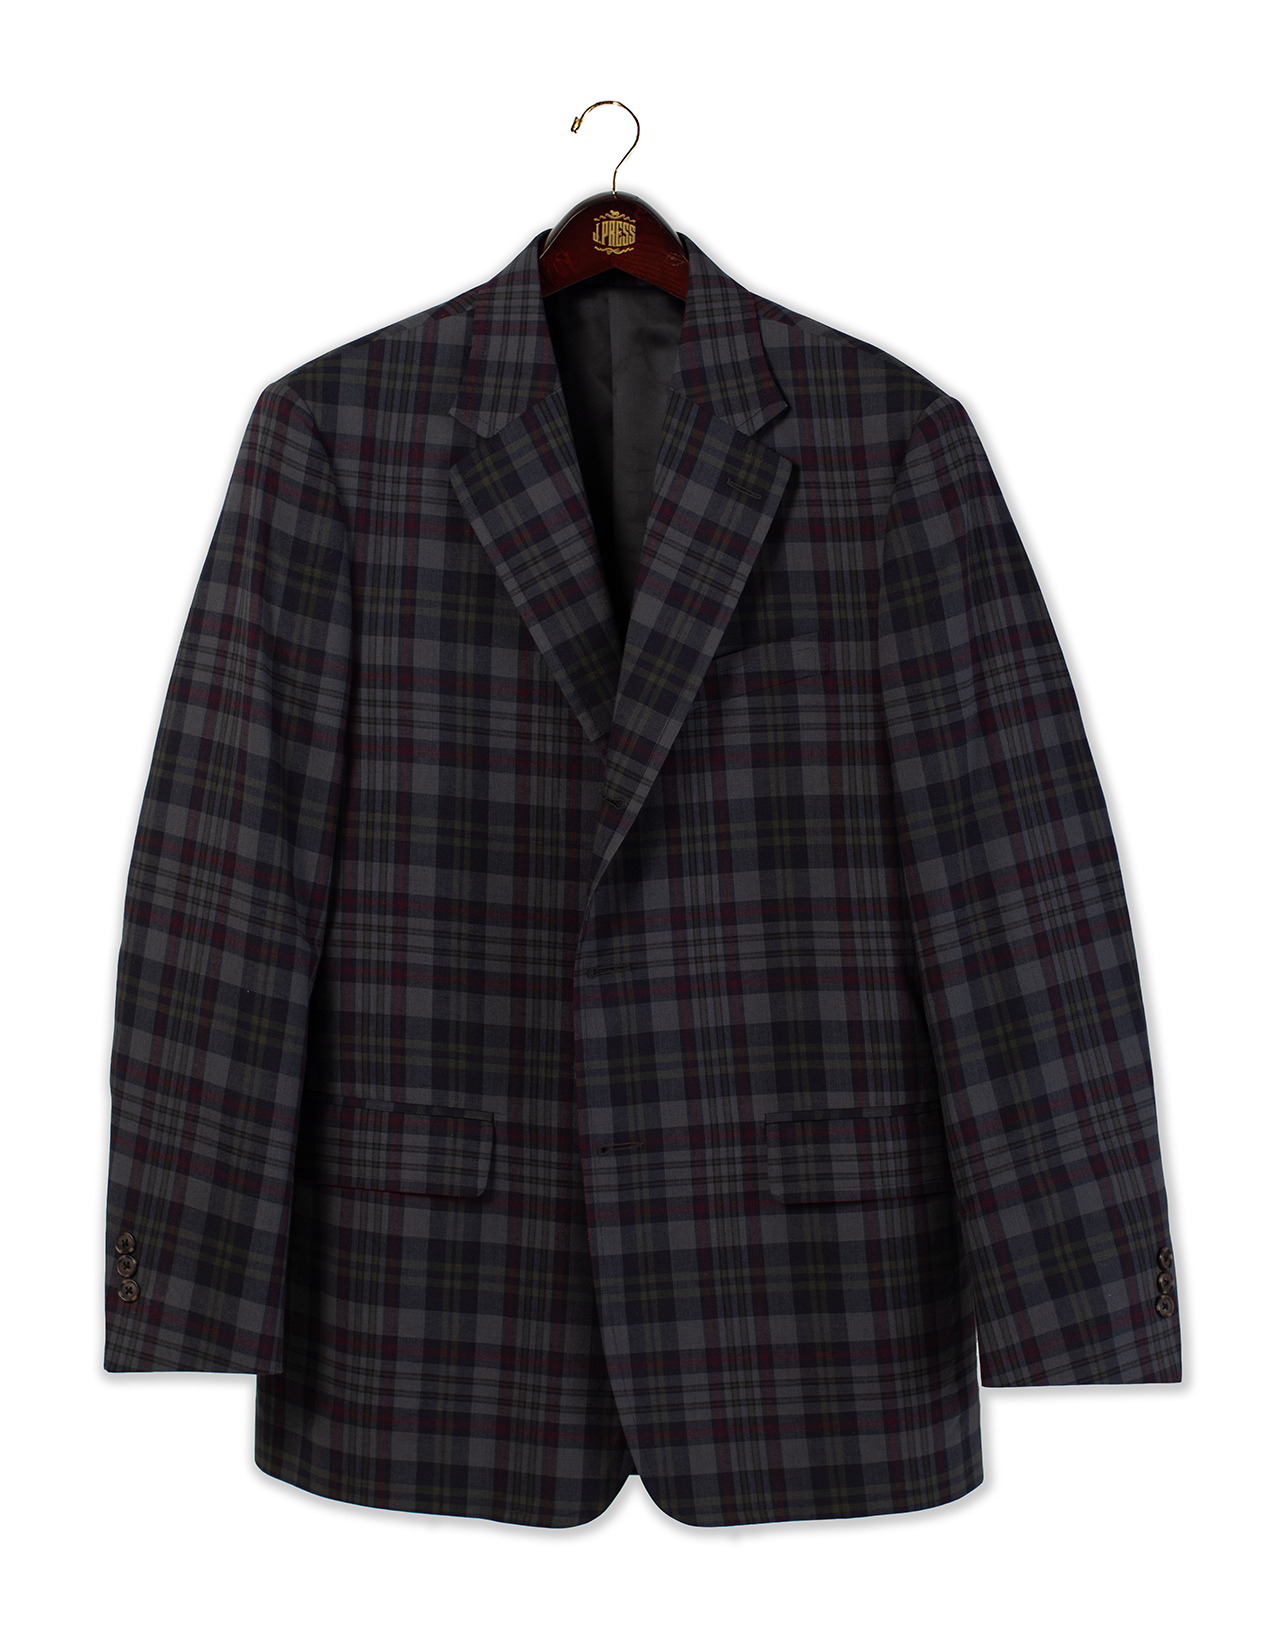 BLUE TEA STAINED MADRAS SPORT COAT - CLASSIC FIT